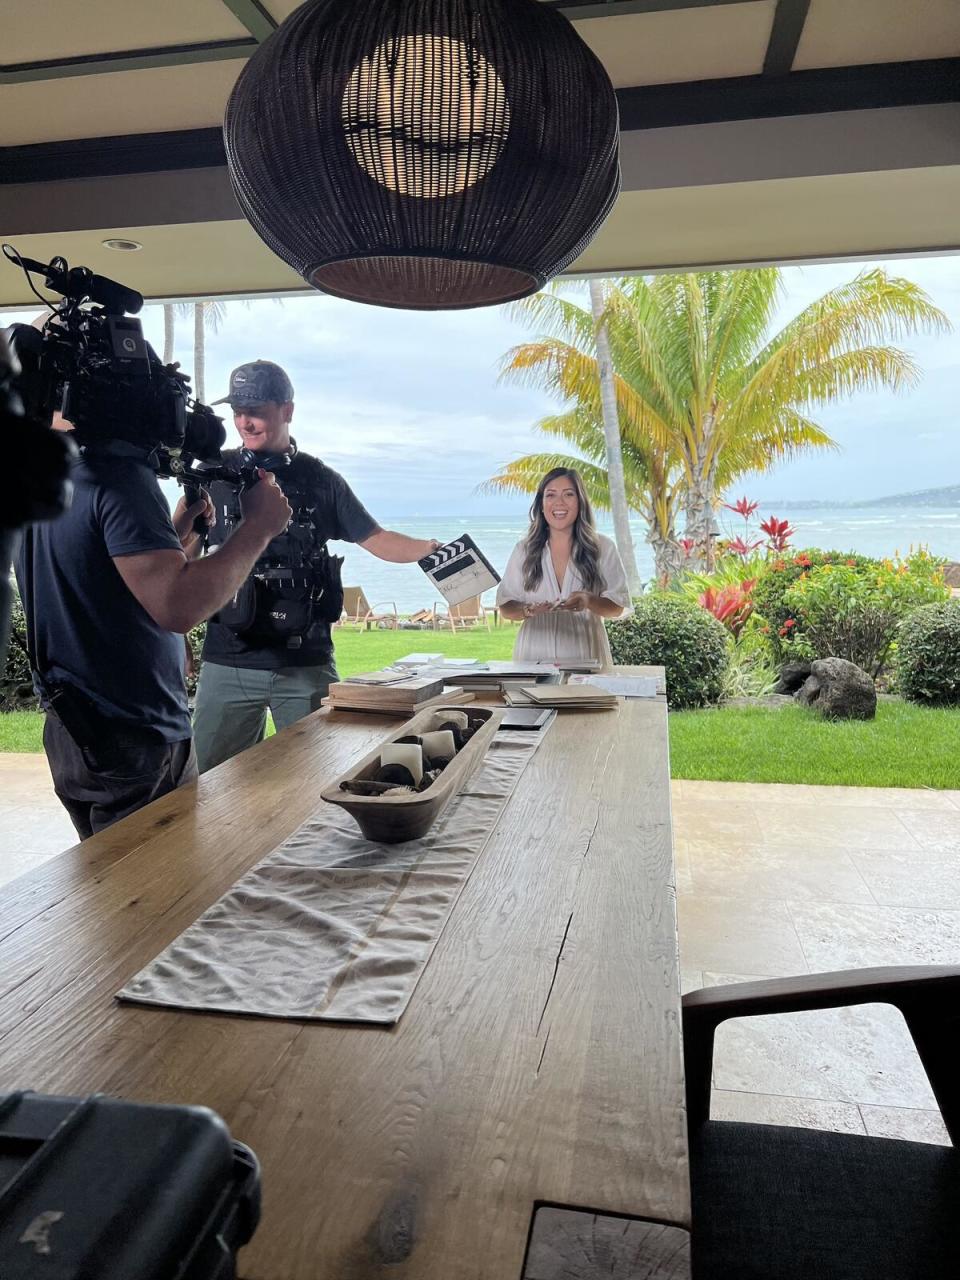 Low behind the scenes of the pilot episode of “Home in Hawaii”